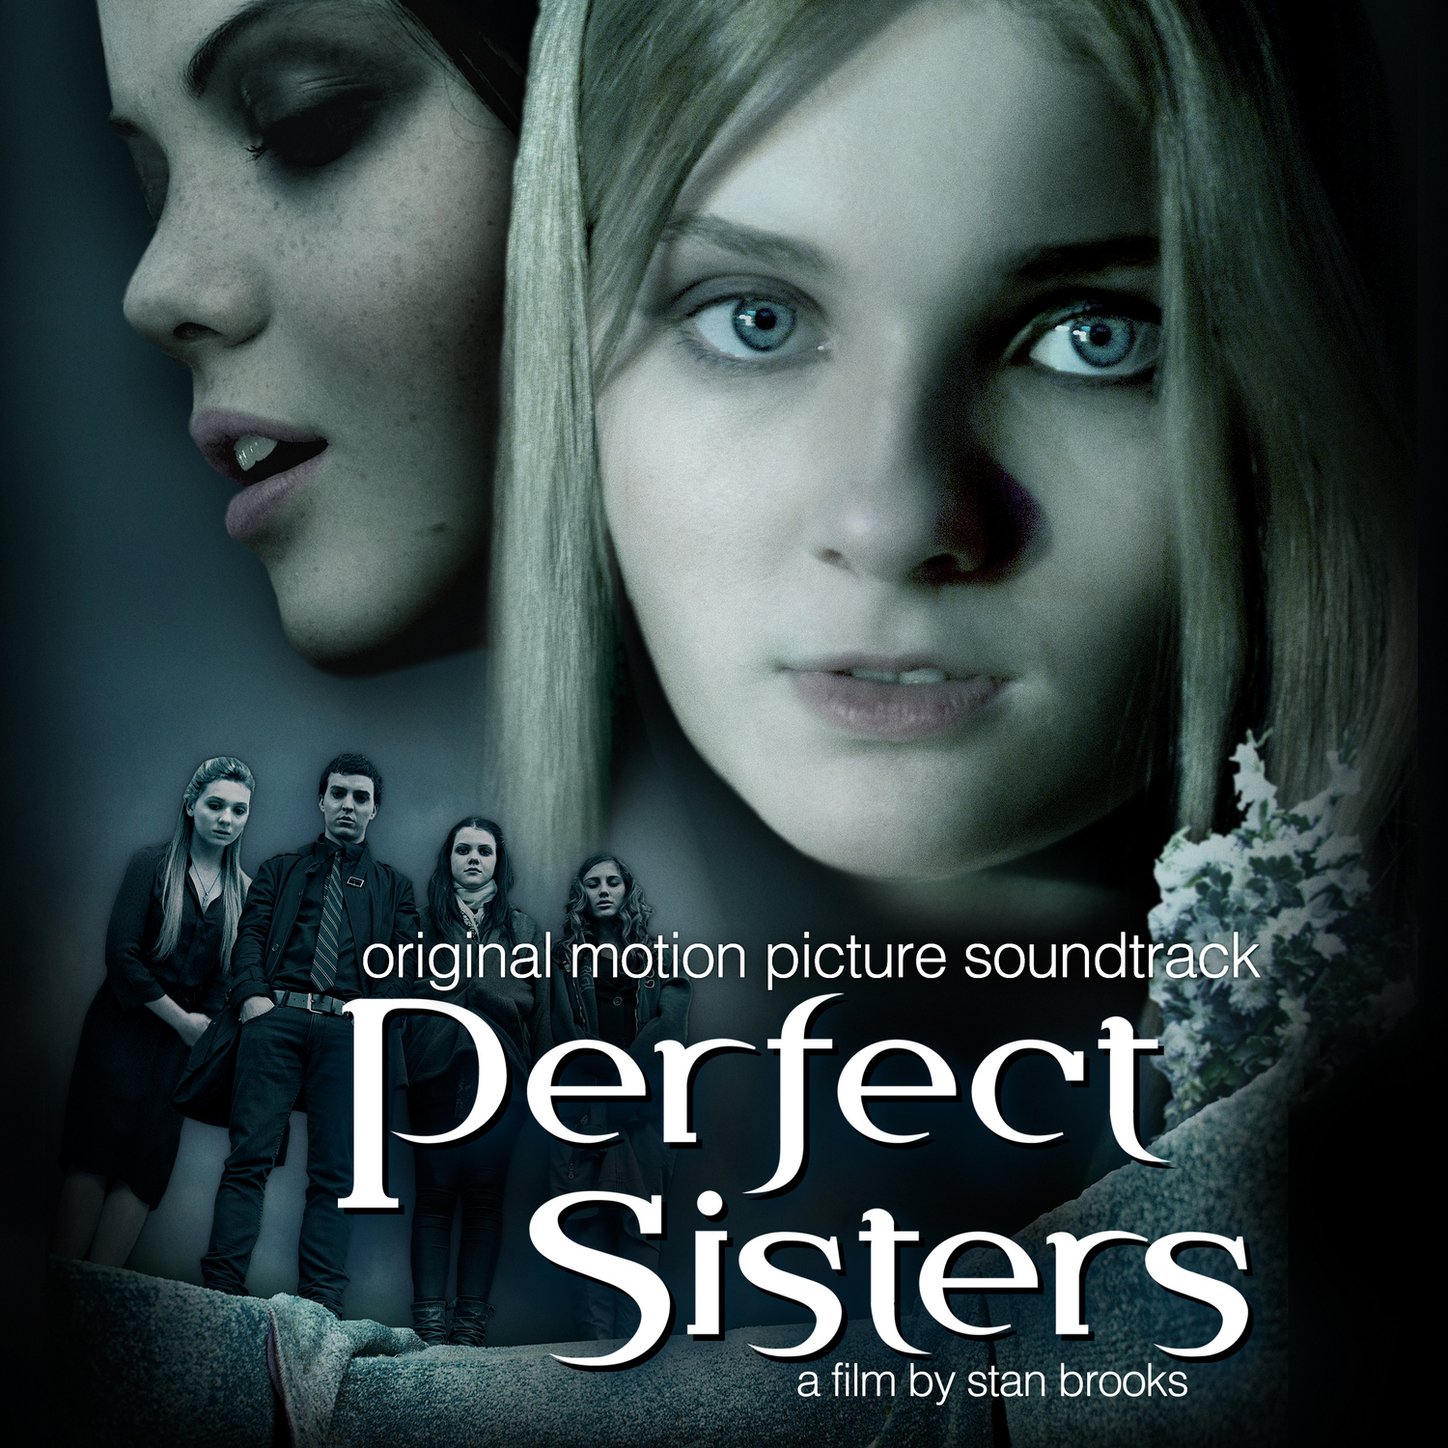 Abigail Breslin perfect sisters. OST сестры. Sisters Original Motion picture.